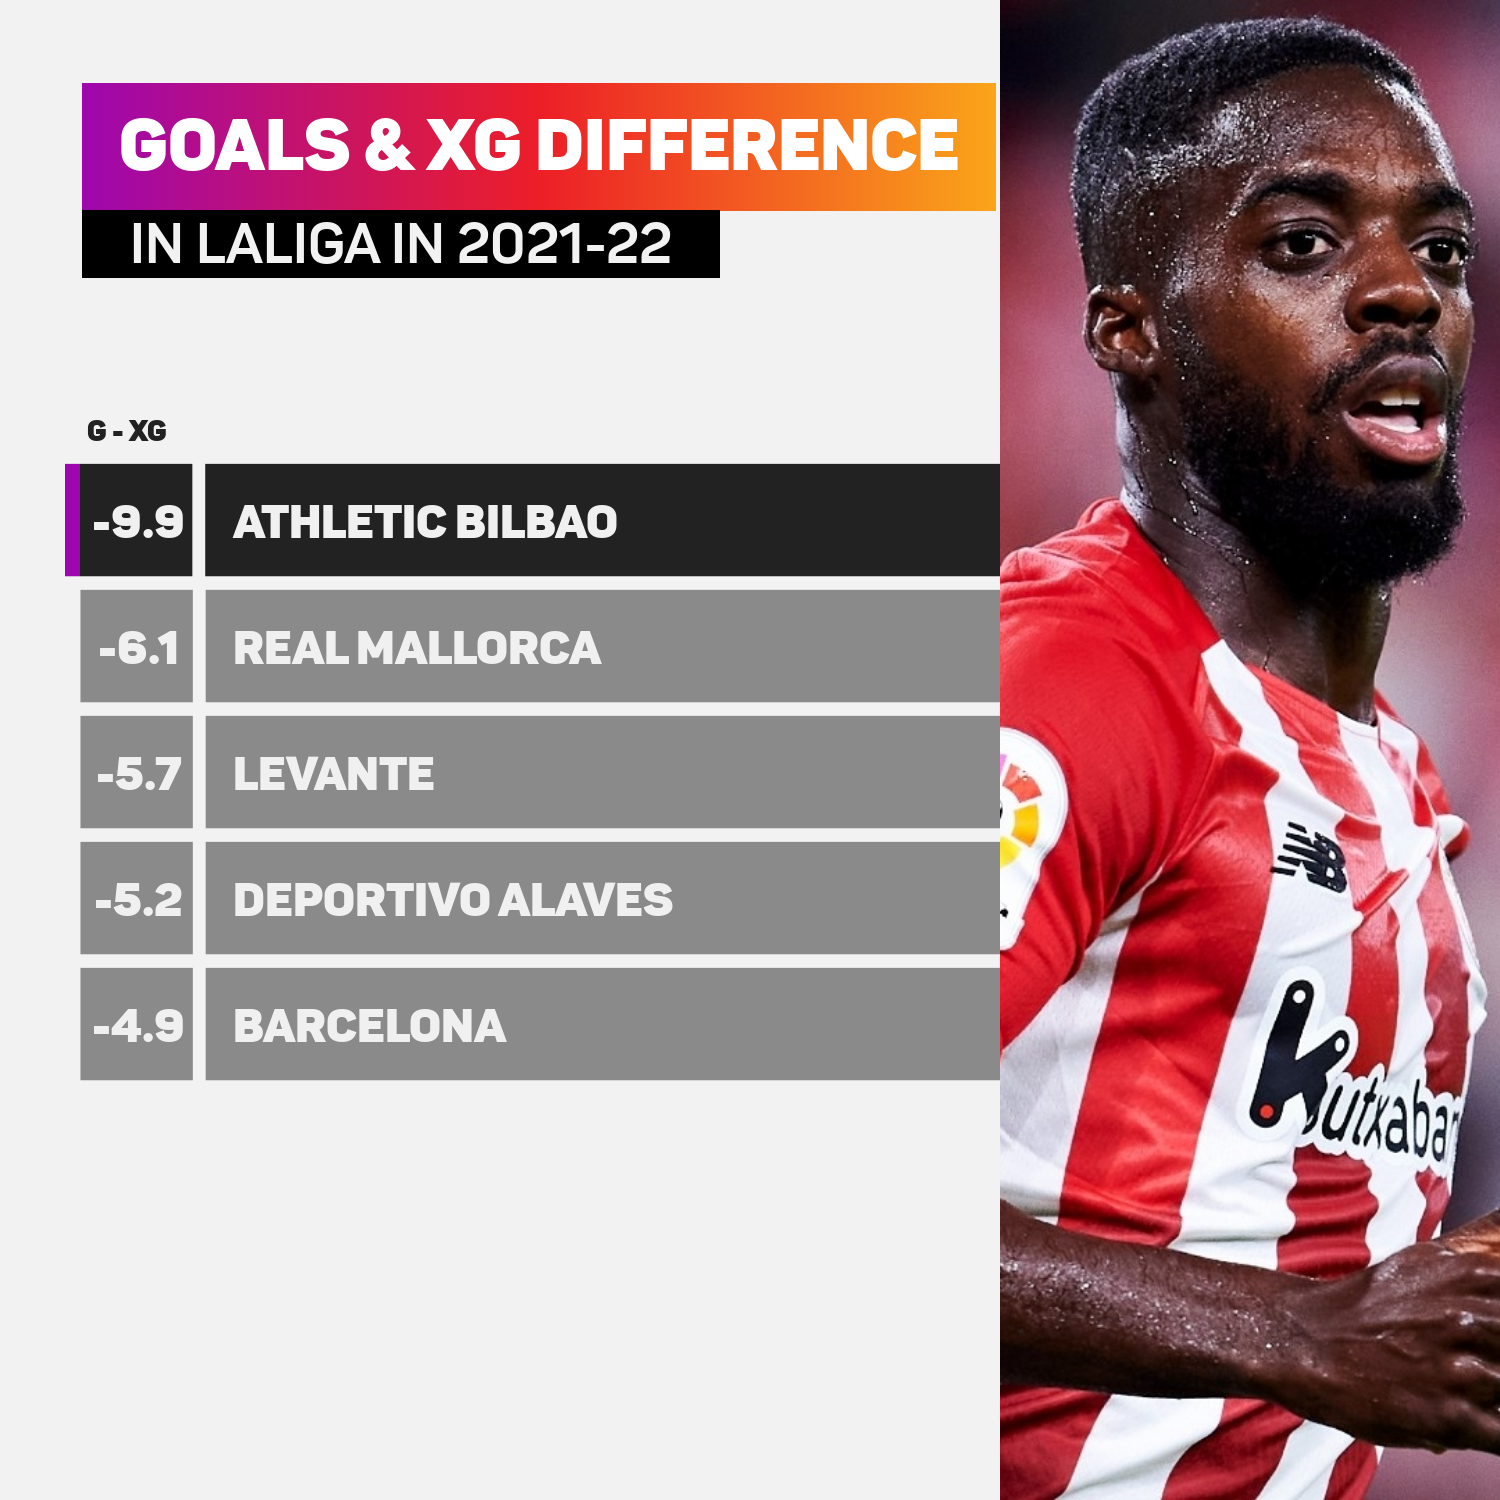 Athletic Bilbao top of negative xG differential in LaLiga